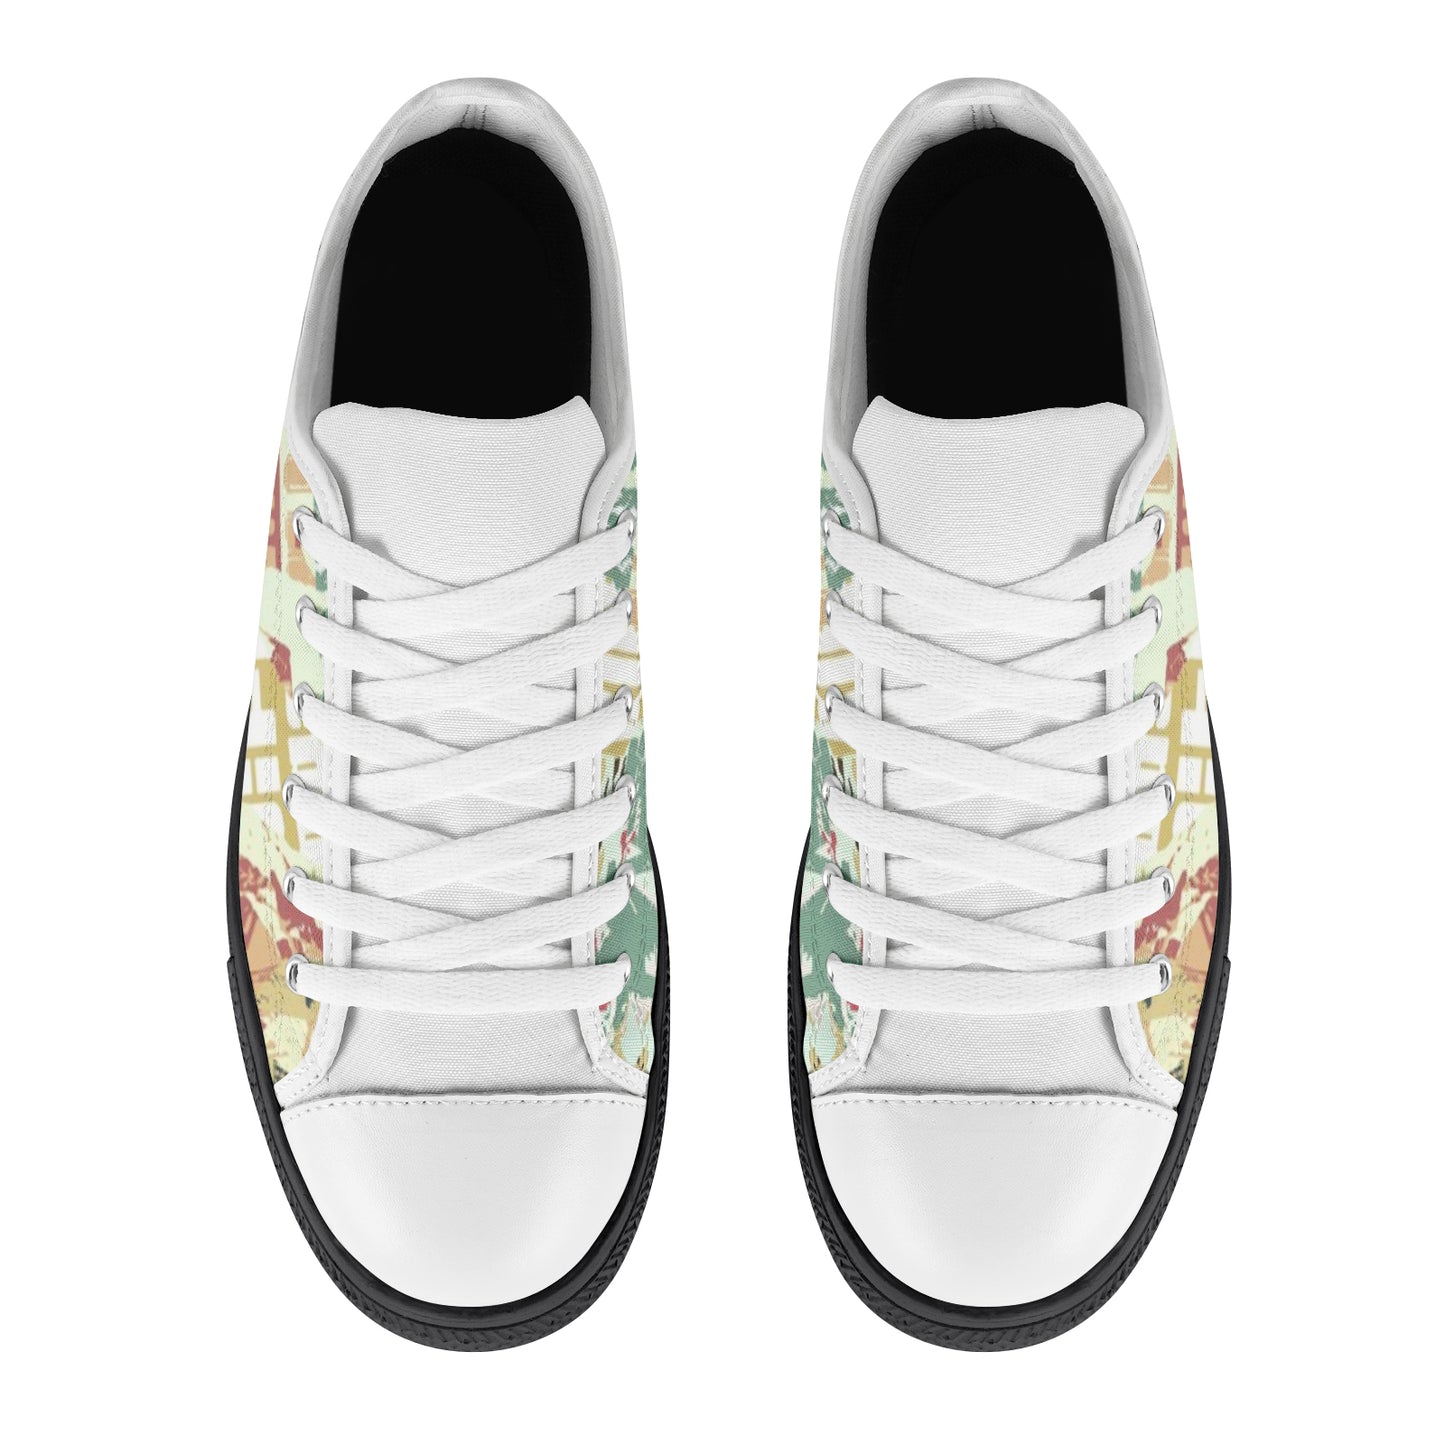 Men's Canvas Sneakers - Newspaper Style